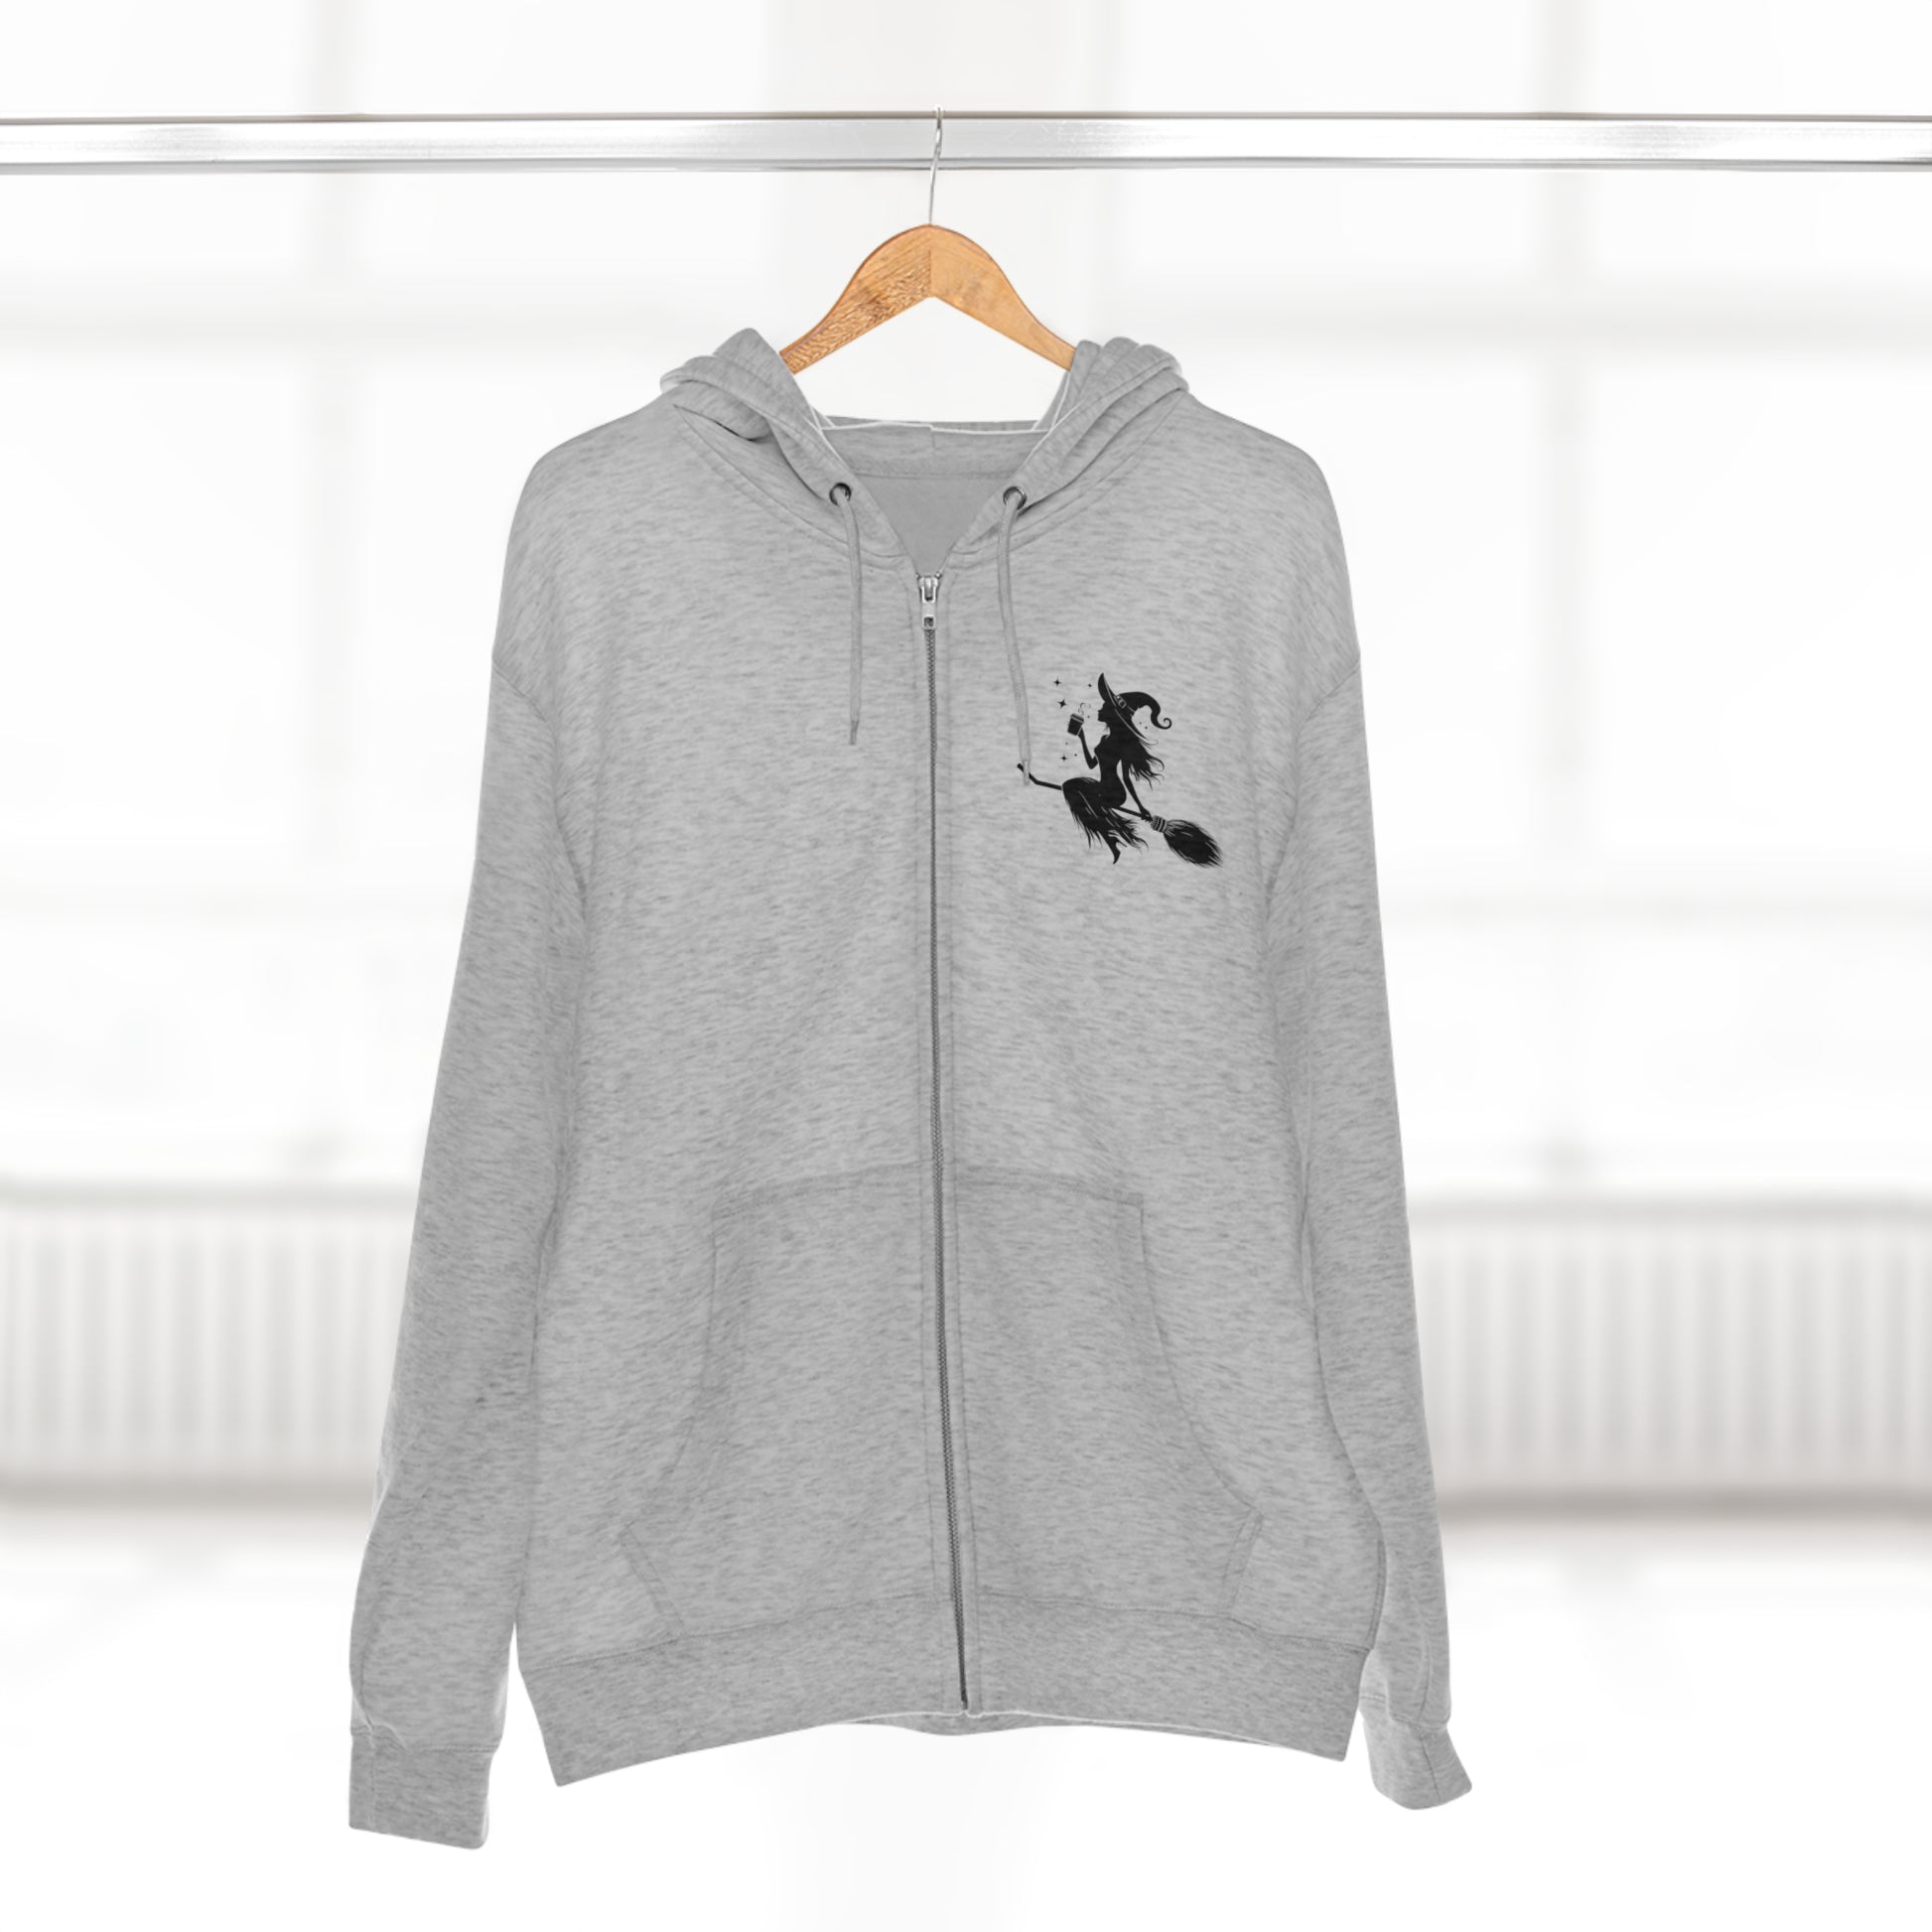 Hoodie: featuring a witch flying with a coffee cup, with a moon in the background. Gray color Hoodie with Black graphics on the front chest, and back.